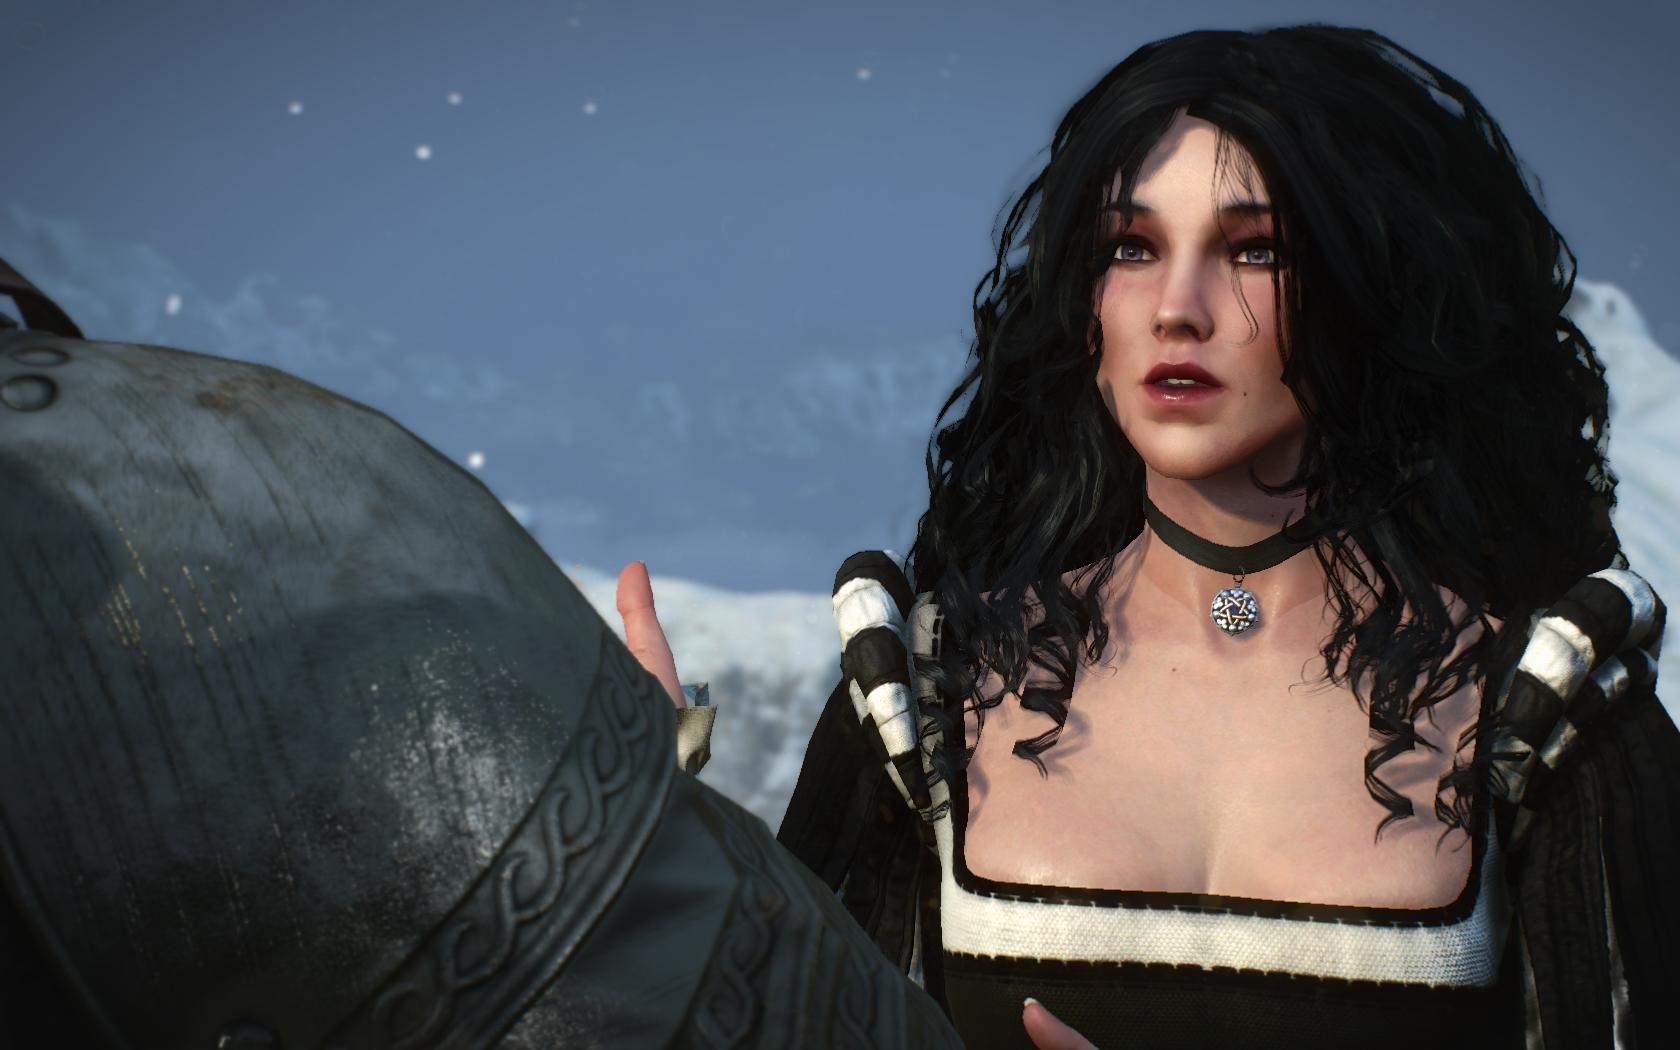 The witcher 3 alternative look for yennefer фото 60